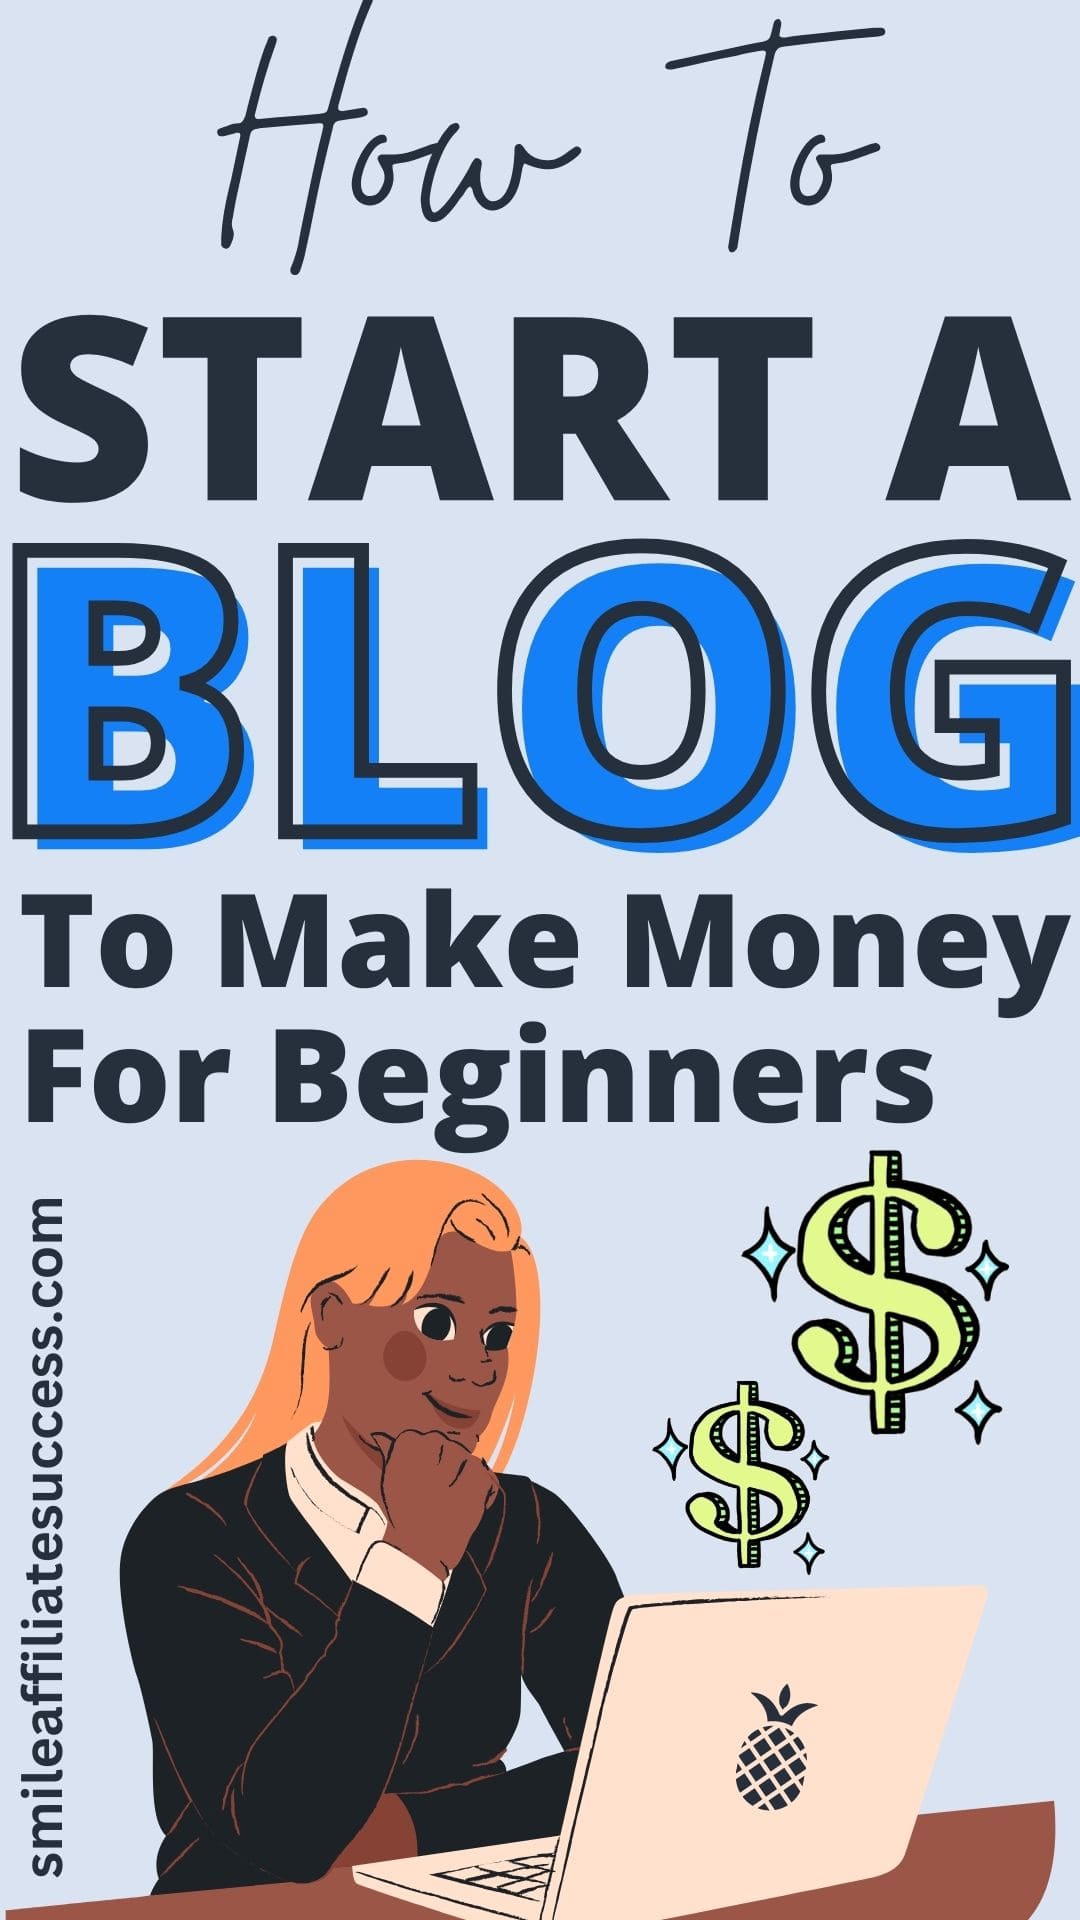 How To Start A Blog - A Step-By-Step Tutorial For Beginners!